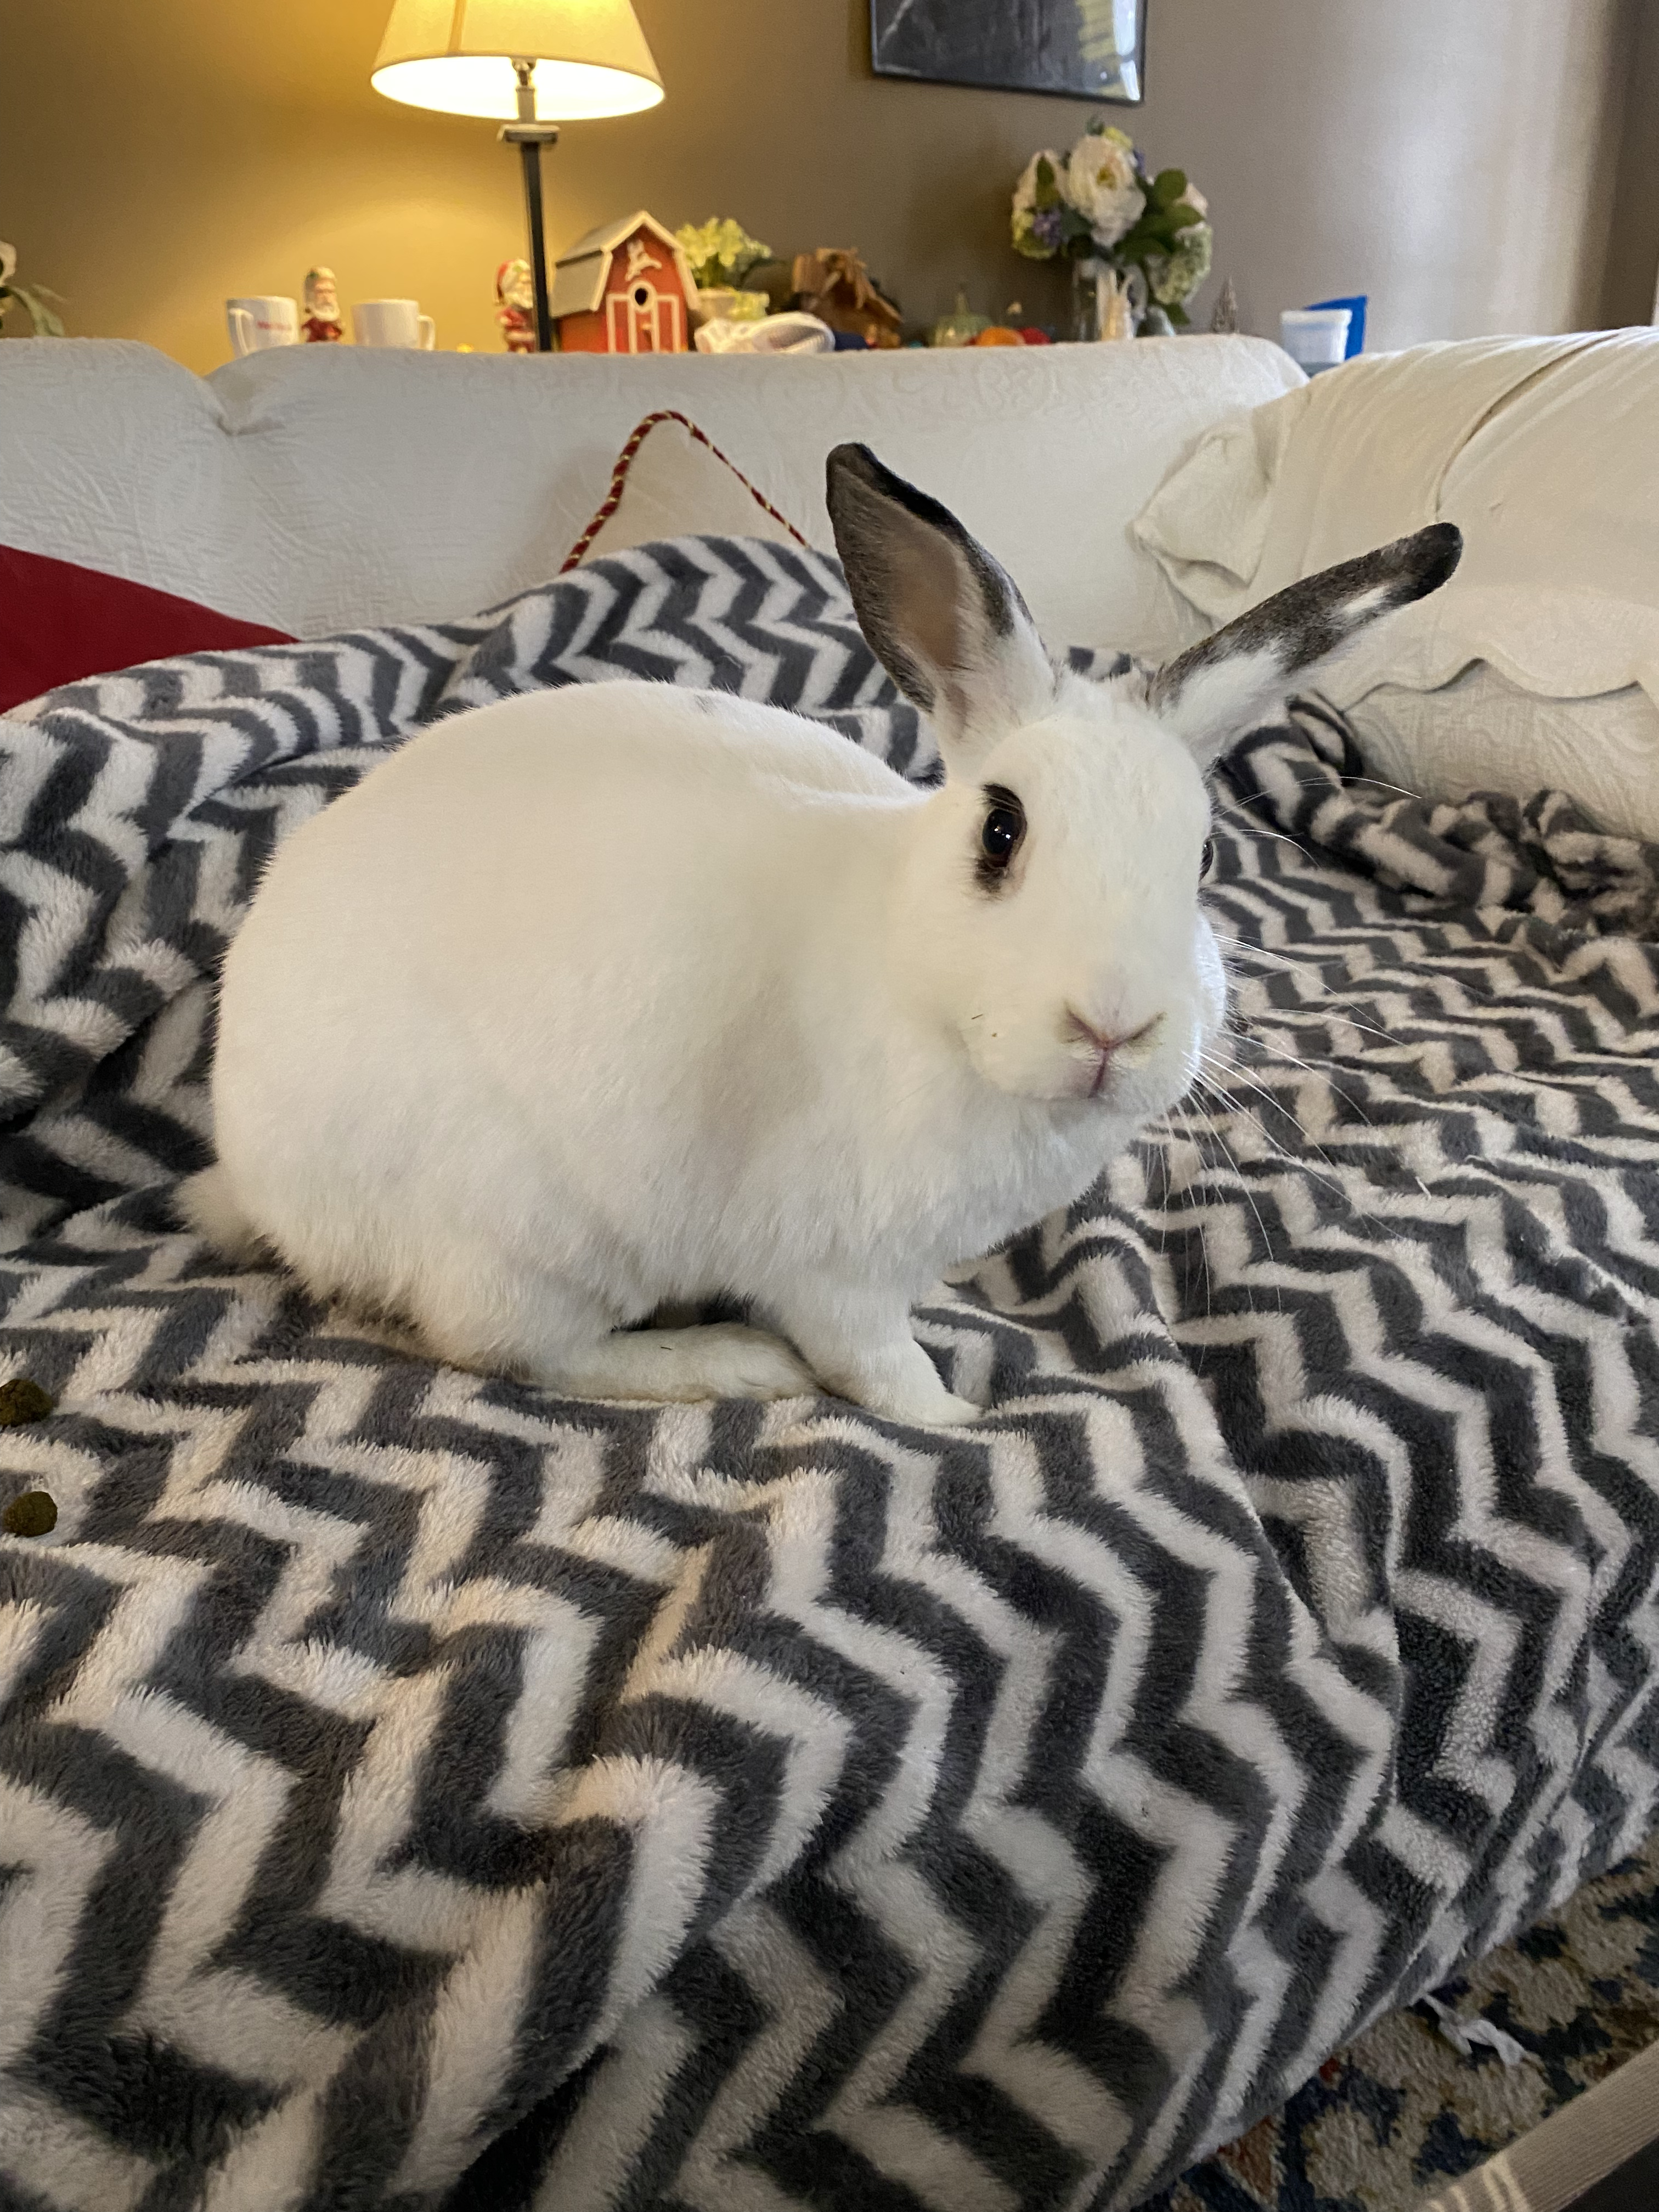 Our white bunny, Clover, sitting on the couch, looking beautiful.